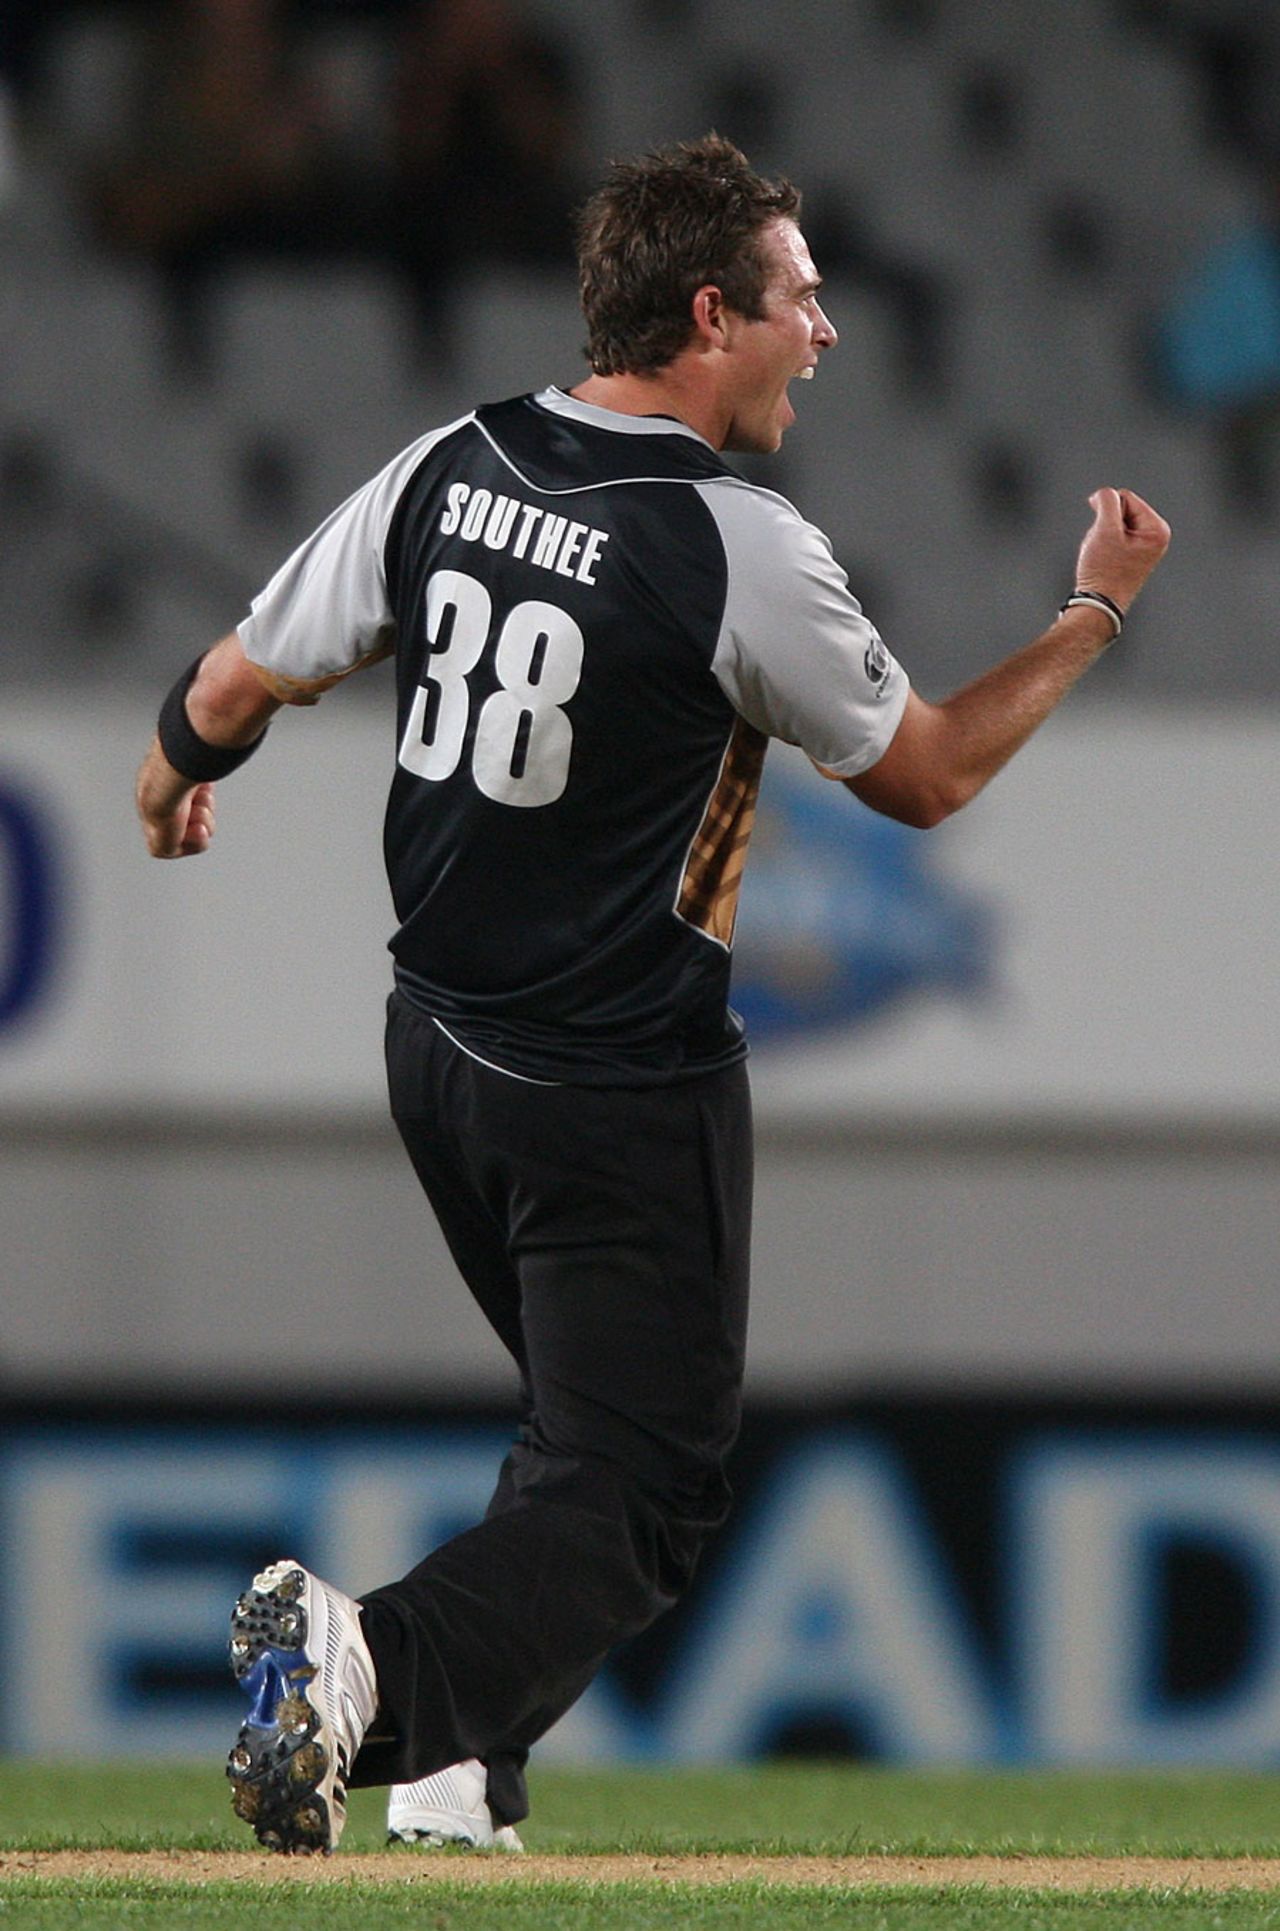 Tim Southee celebrates a wicket, New Zealand v South Africa, 3rd Twenty20, Auckland, February 22, 2012